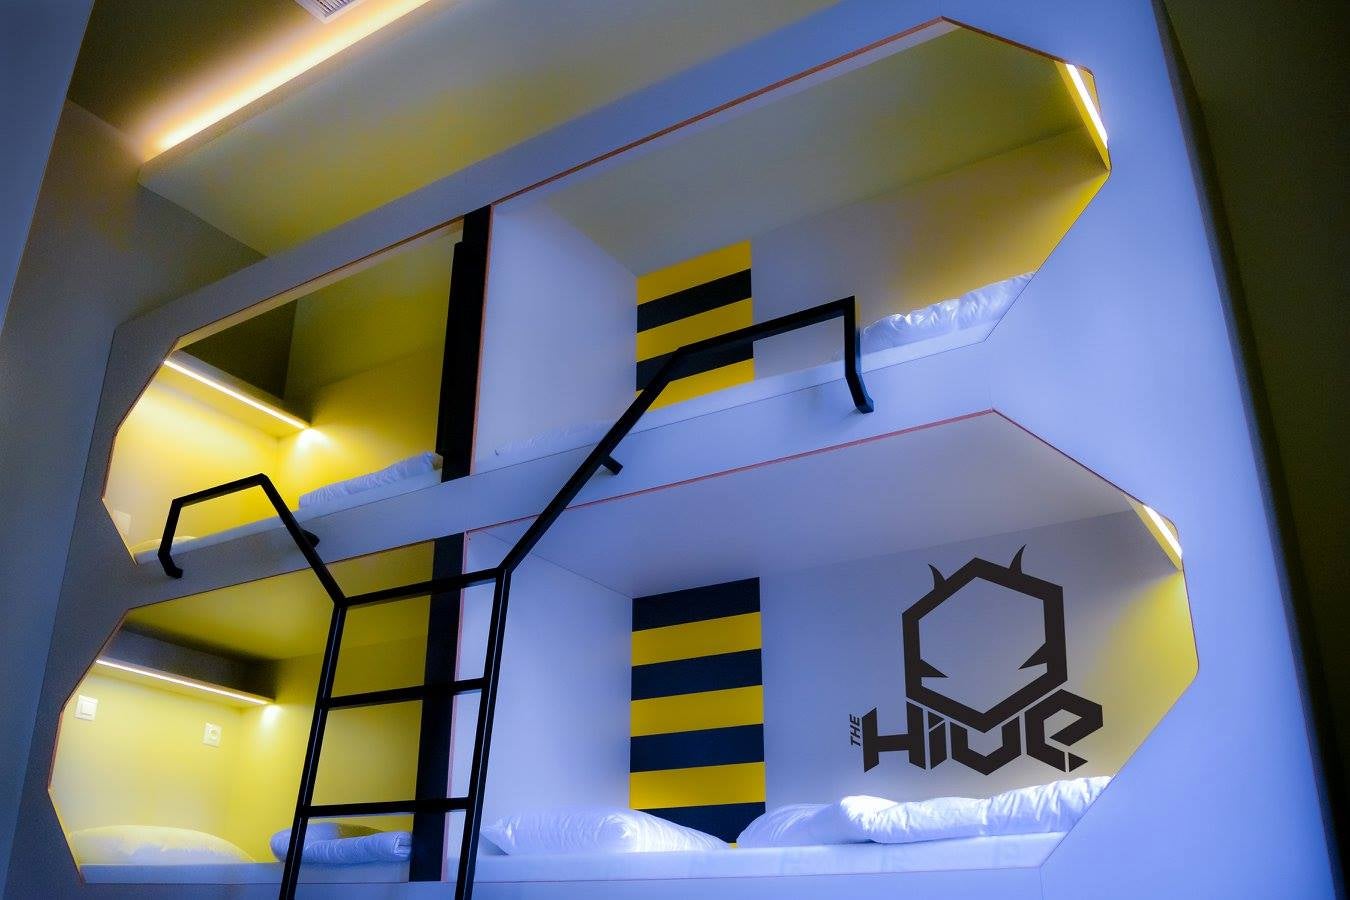 The Hive is the ideal residence for those on budget looking to party